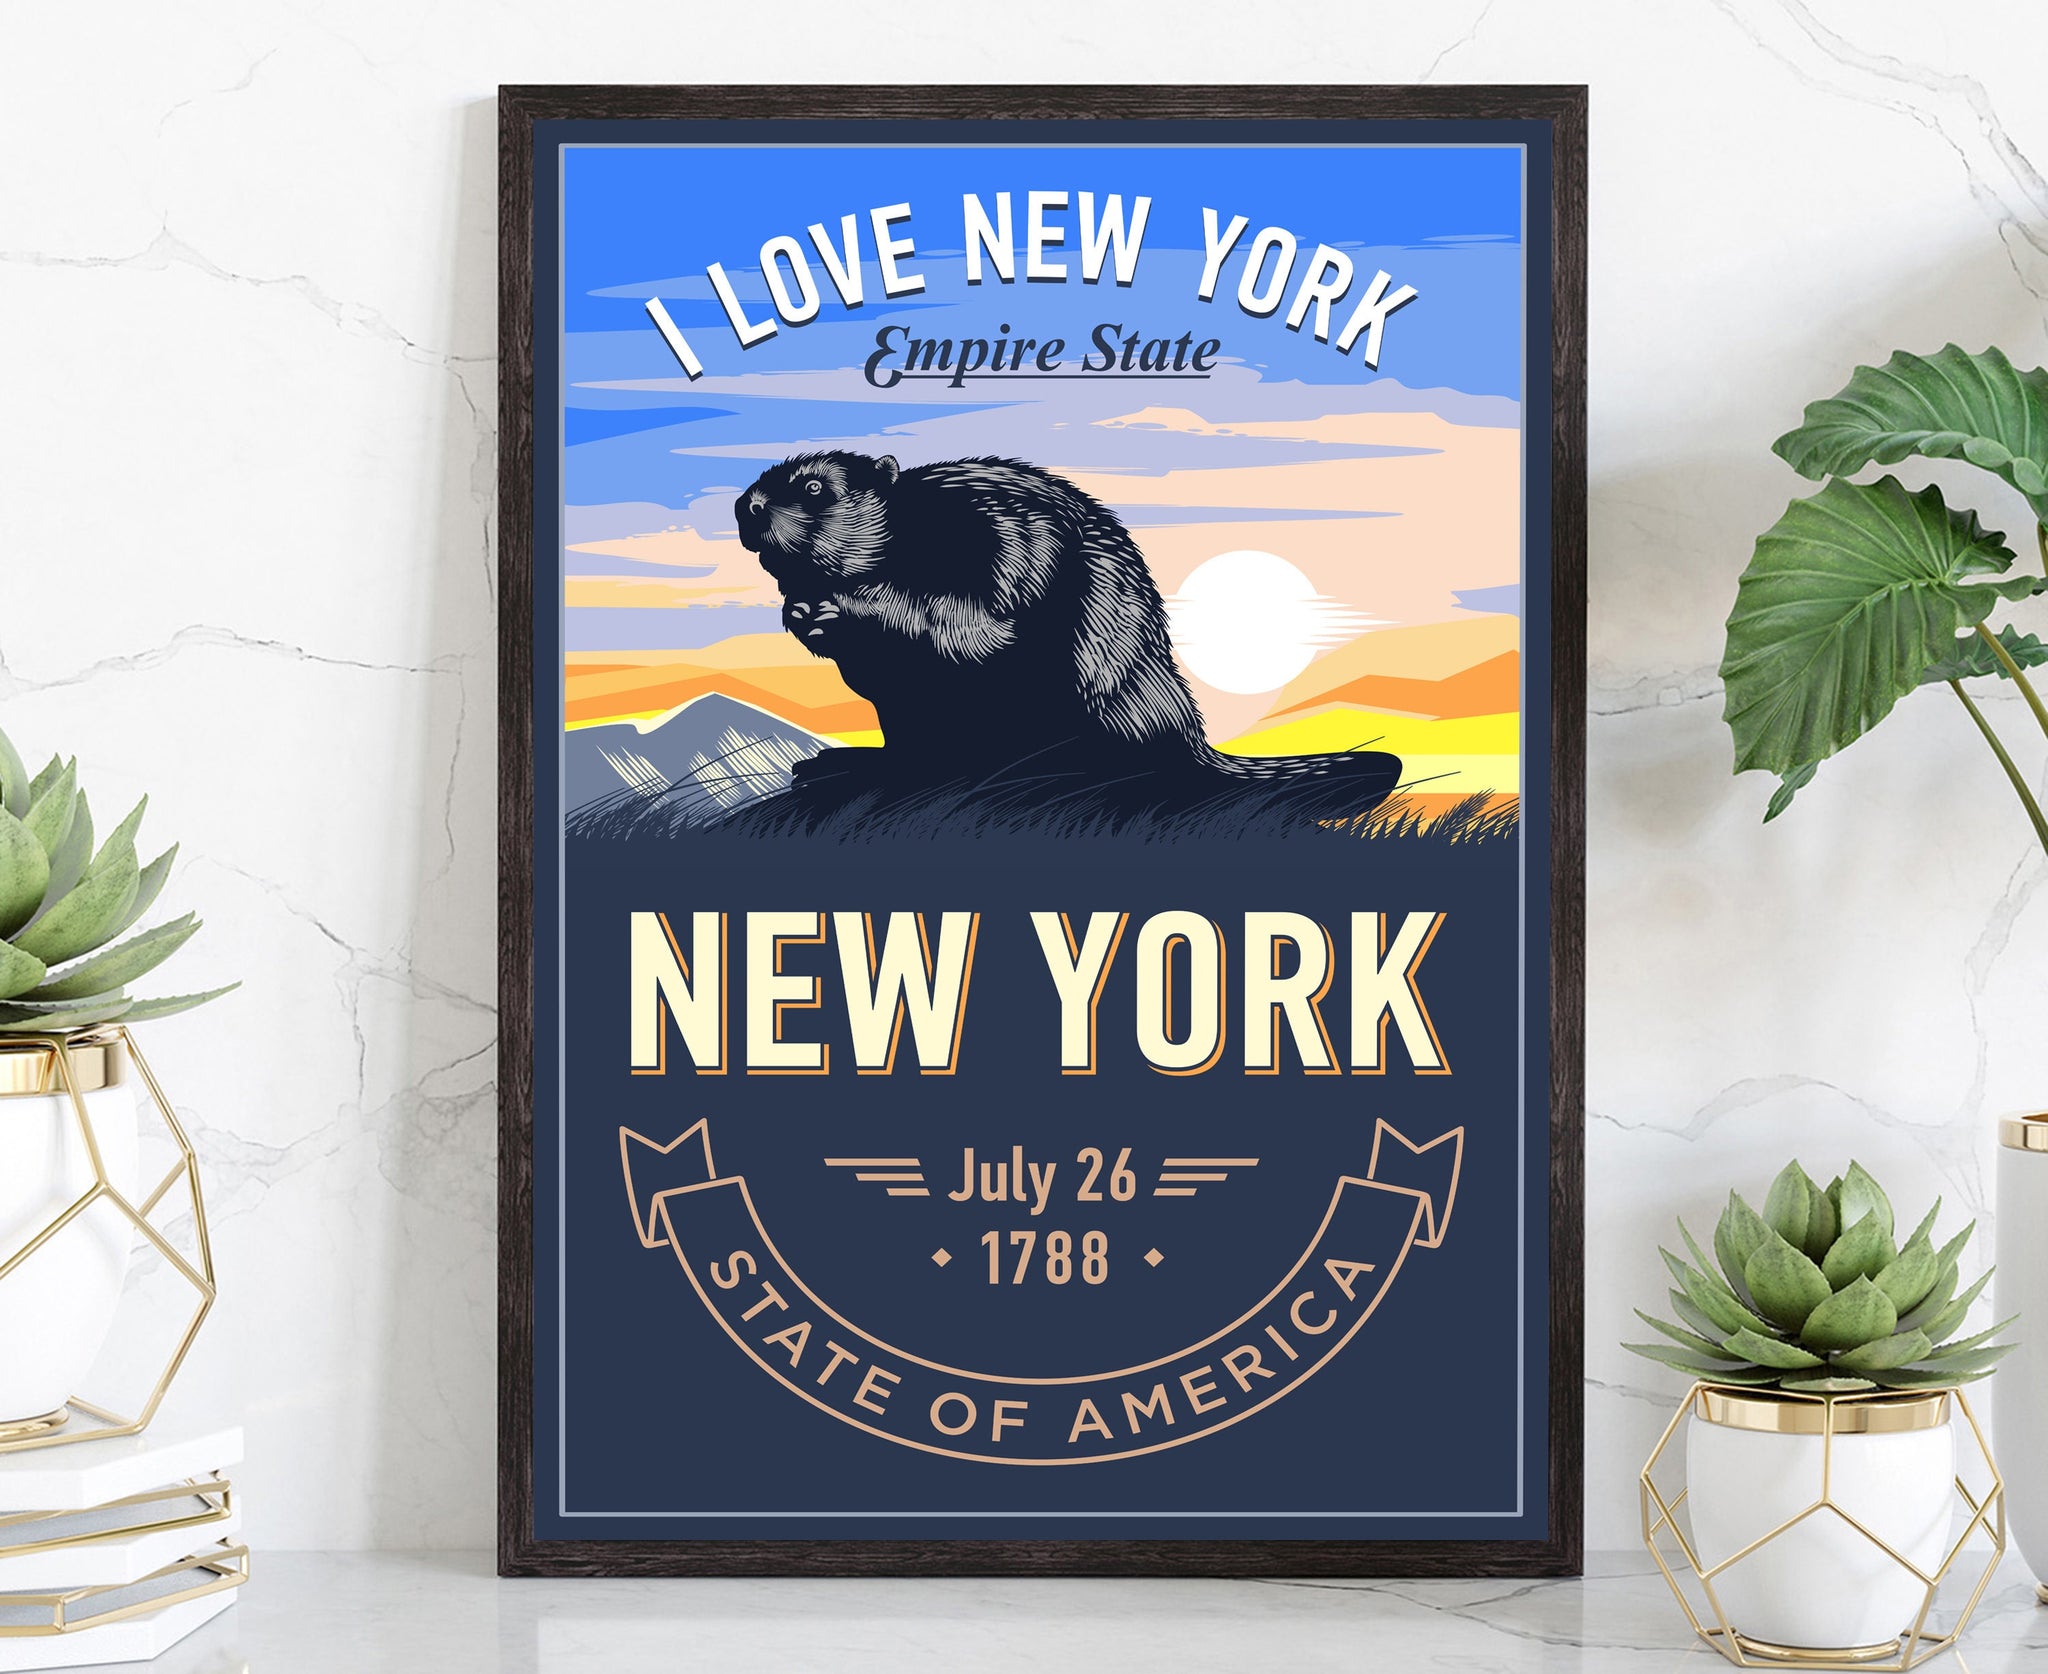 United States Poster, New York State Poster Print, New York State Emblem Poster, Retro Travel State Poster, Home Wall Art, Office Wall Art